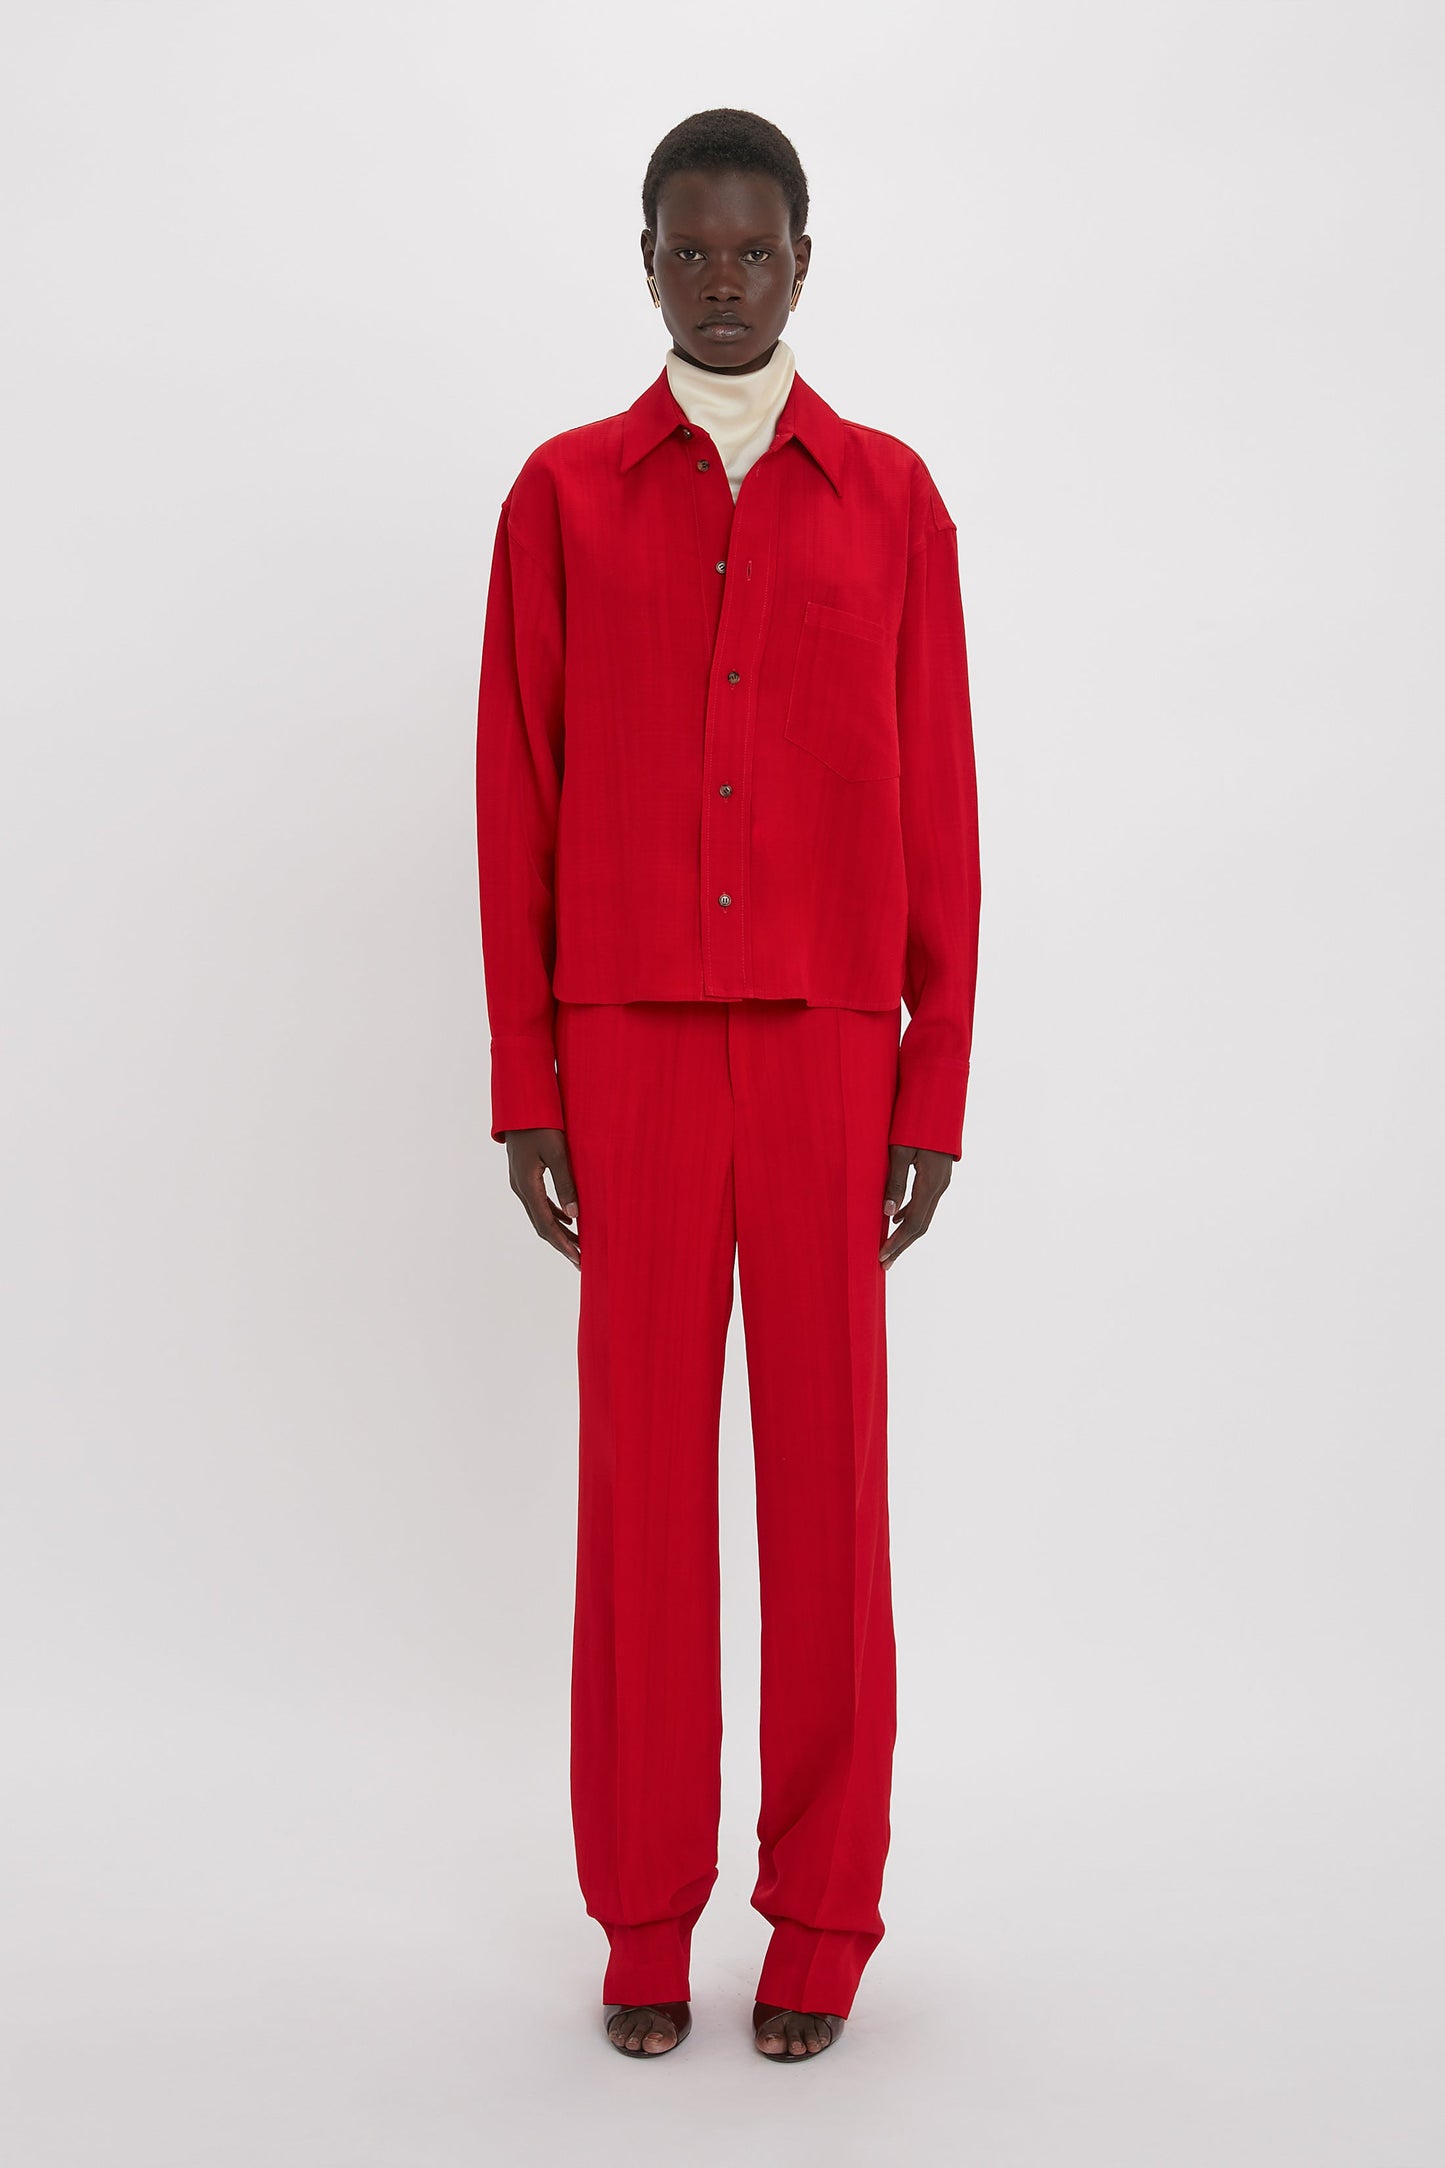 A person stands against a white background wearing a Victoria Beckham Cropped Long Sleeve Shirt In Carmine and matching red pants with a white turtleneck underneath, exuding a refined yet casual look.